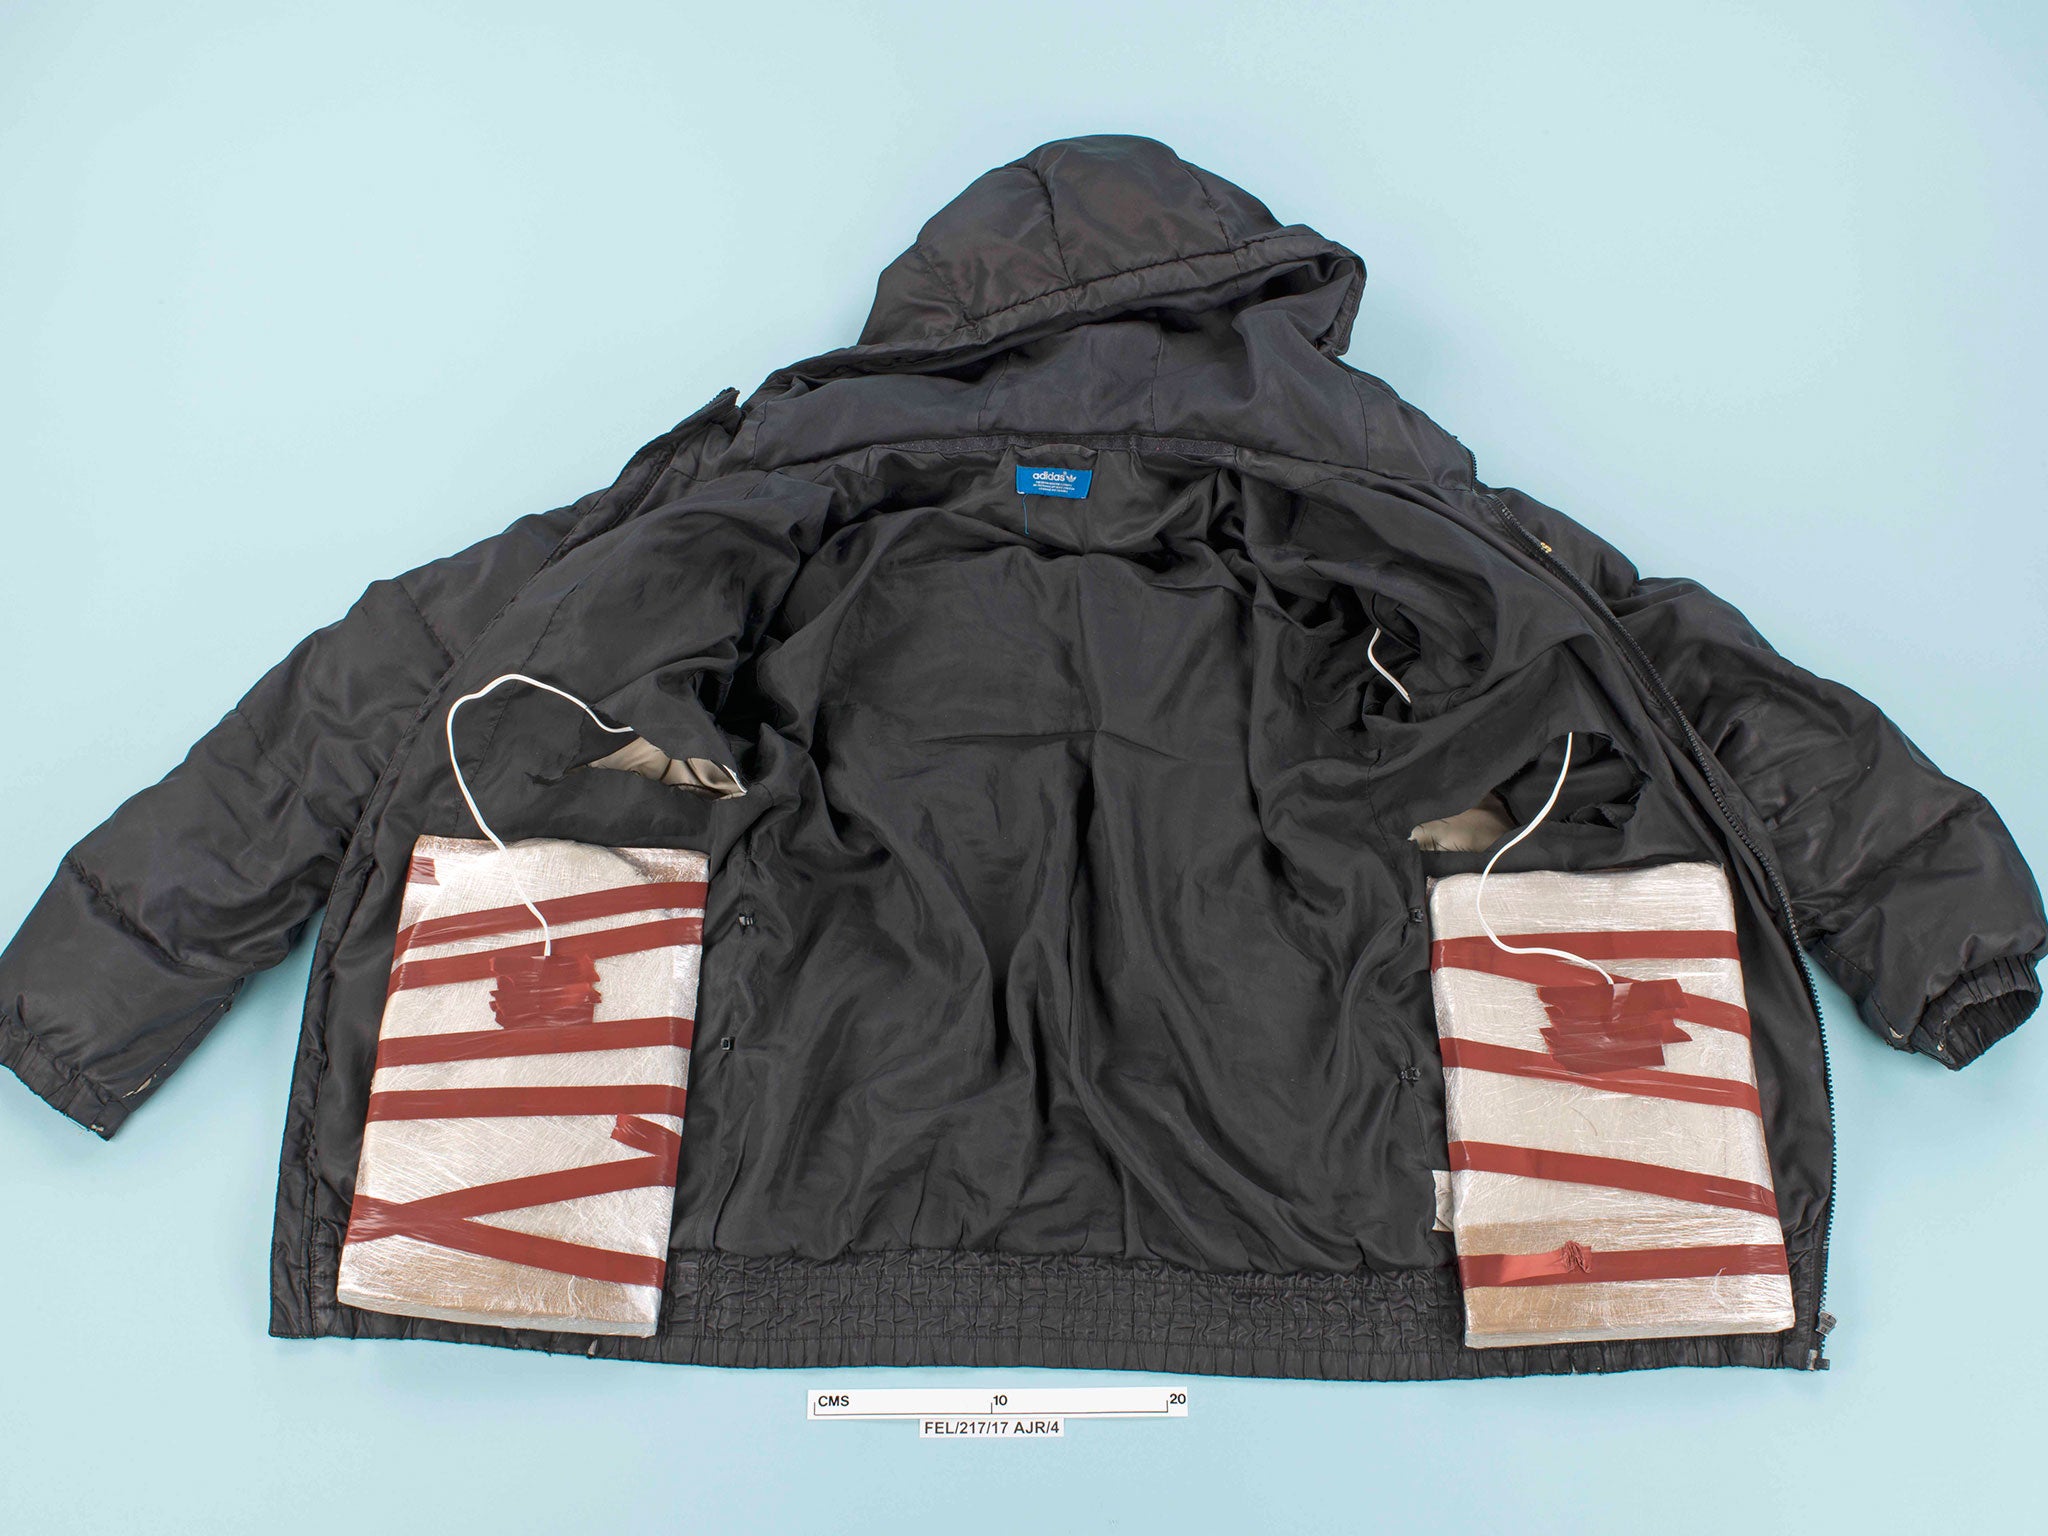 A fake suicide jacket given to Naa’imur Zakariyah Rahman, which he was carrying when he was arrested in November 2017